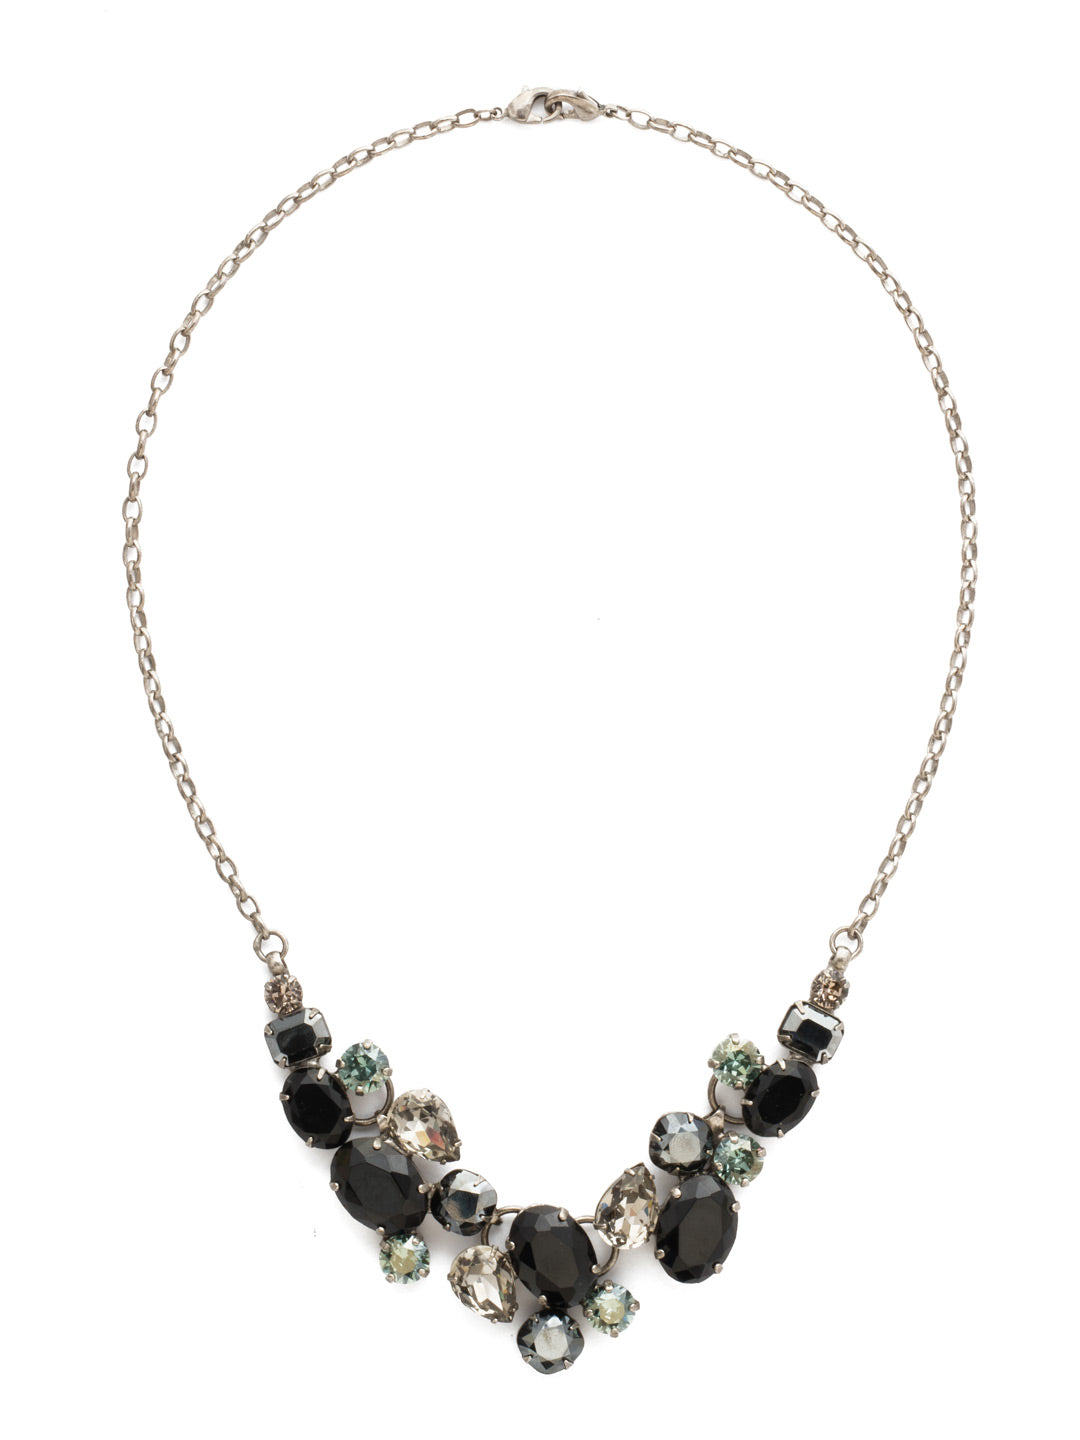 Forget-Me-Not Necklace Bib Necklace - NDQ6ASBON - <p>Captivating clusters of oval, pear, emerald, cushion and round cut crystals form a design that's fun and easy with sparkle for days! This style also features a double lobster claw closure which allows for extreme length adjustment and easy layering with other necklaces. From Sorrelli's Black Onyx collection in our Antique Silver-tone finish.</p>